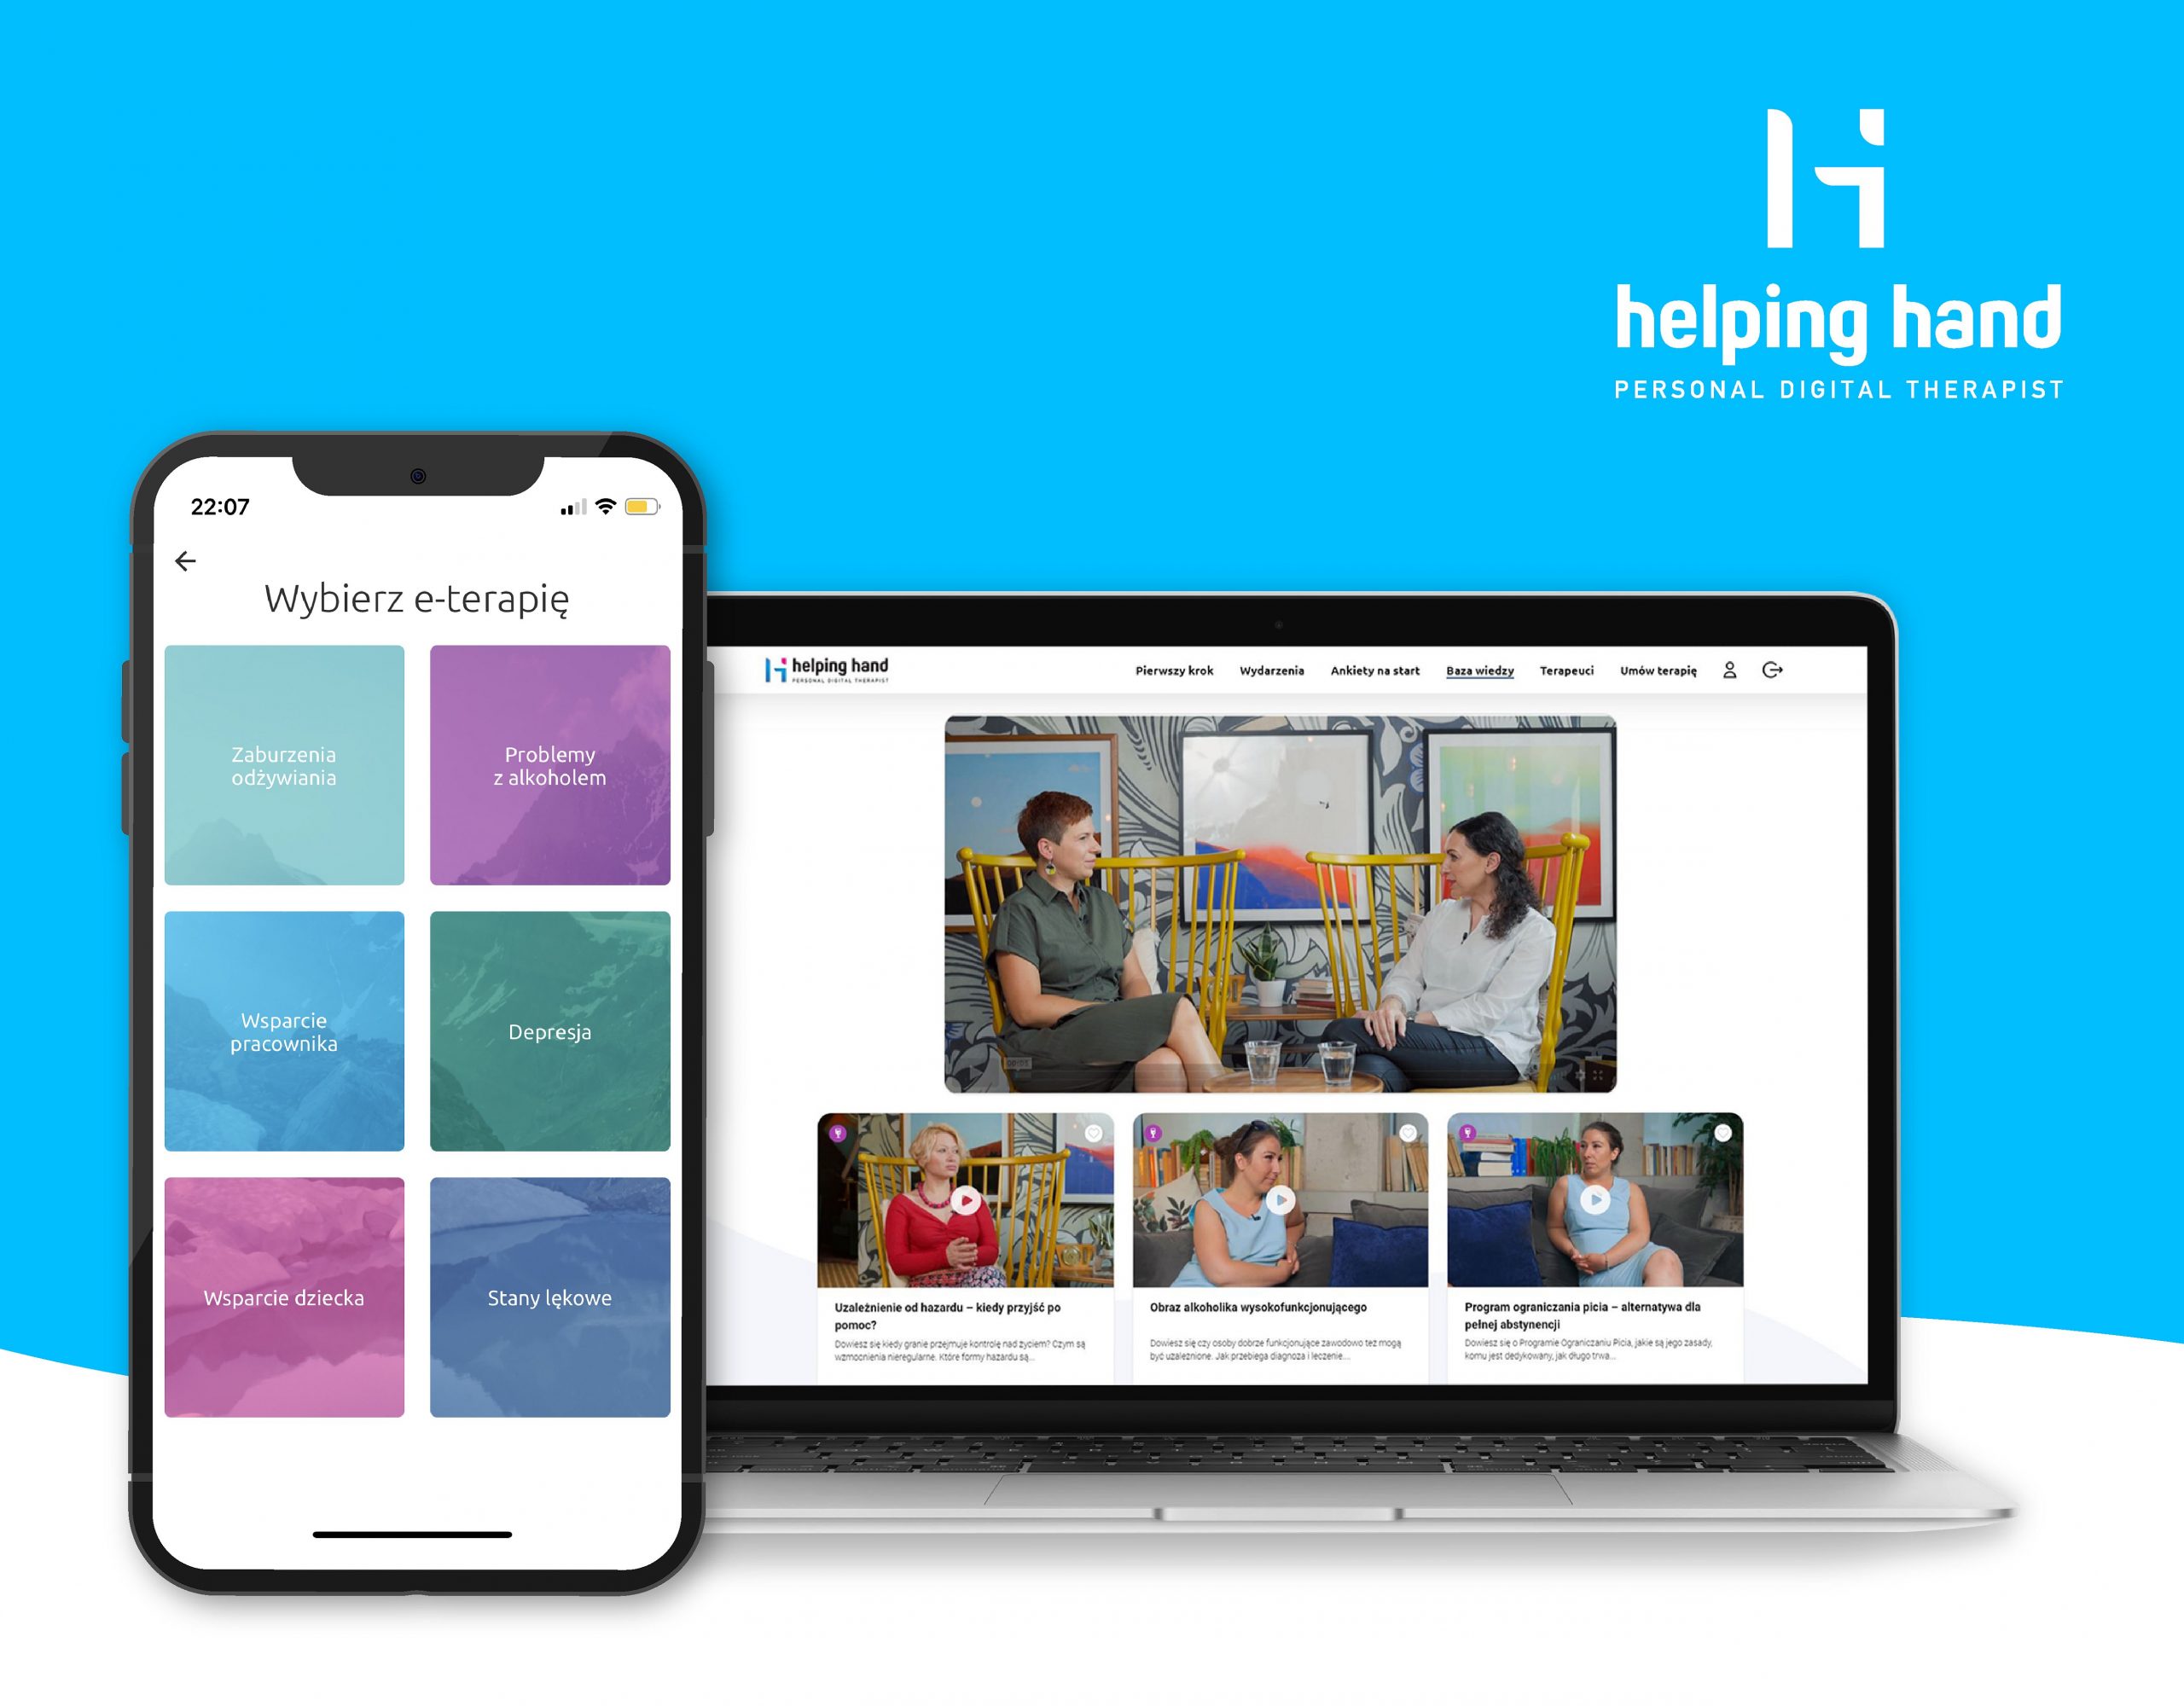 Helping Hand – a platform offering mental health support raises PLN 3 million for product development and international expansion